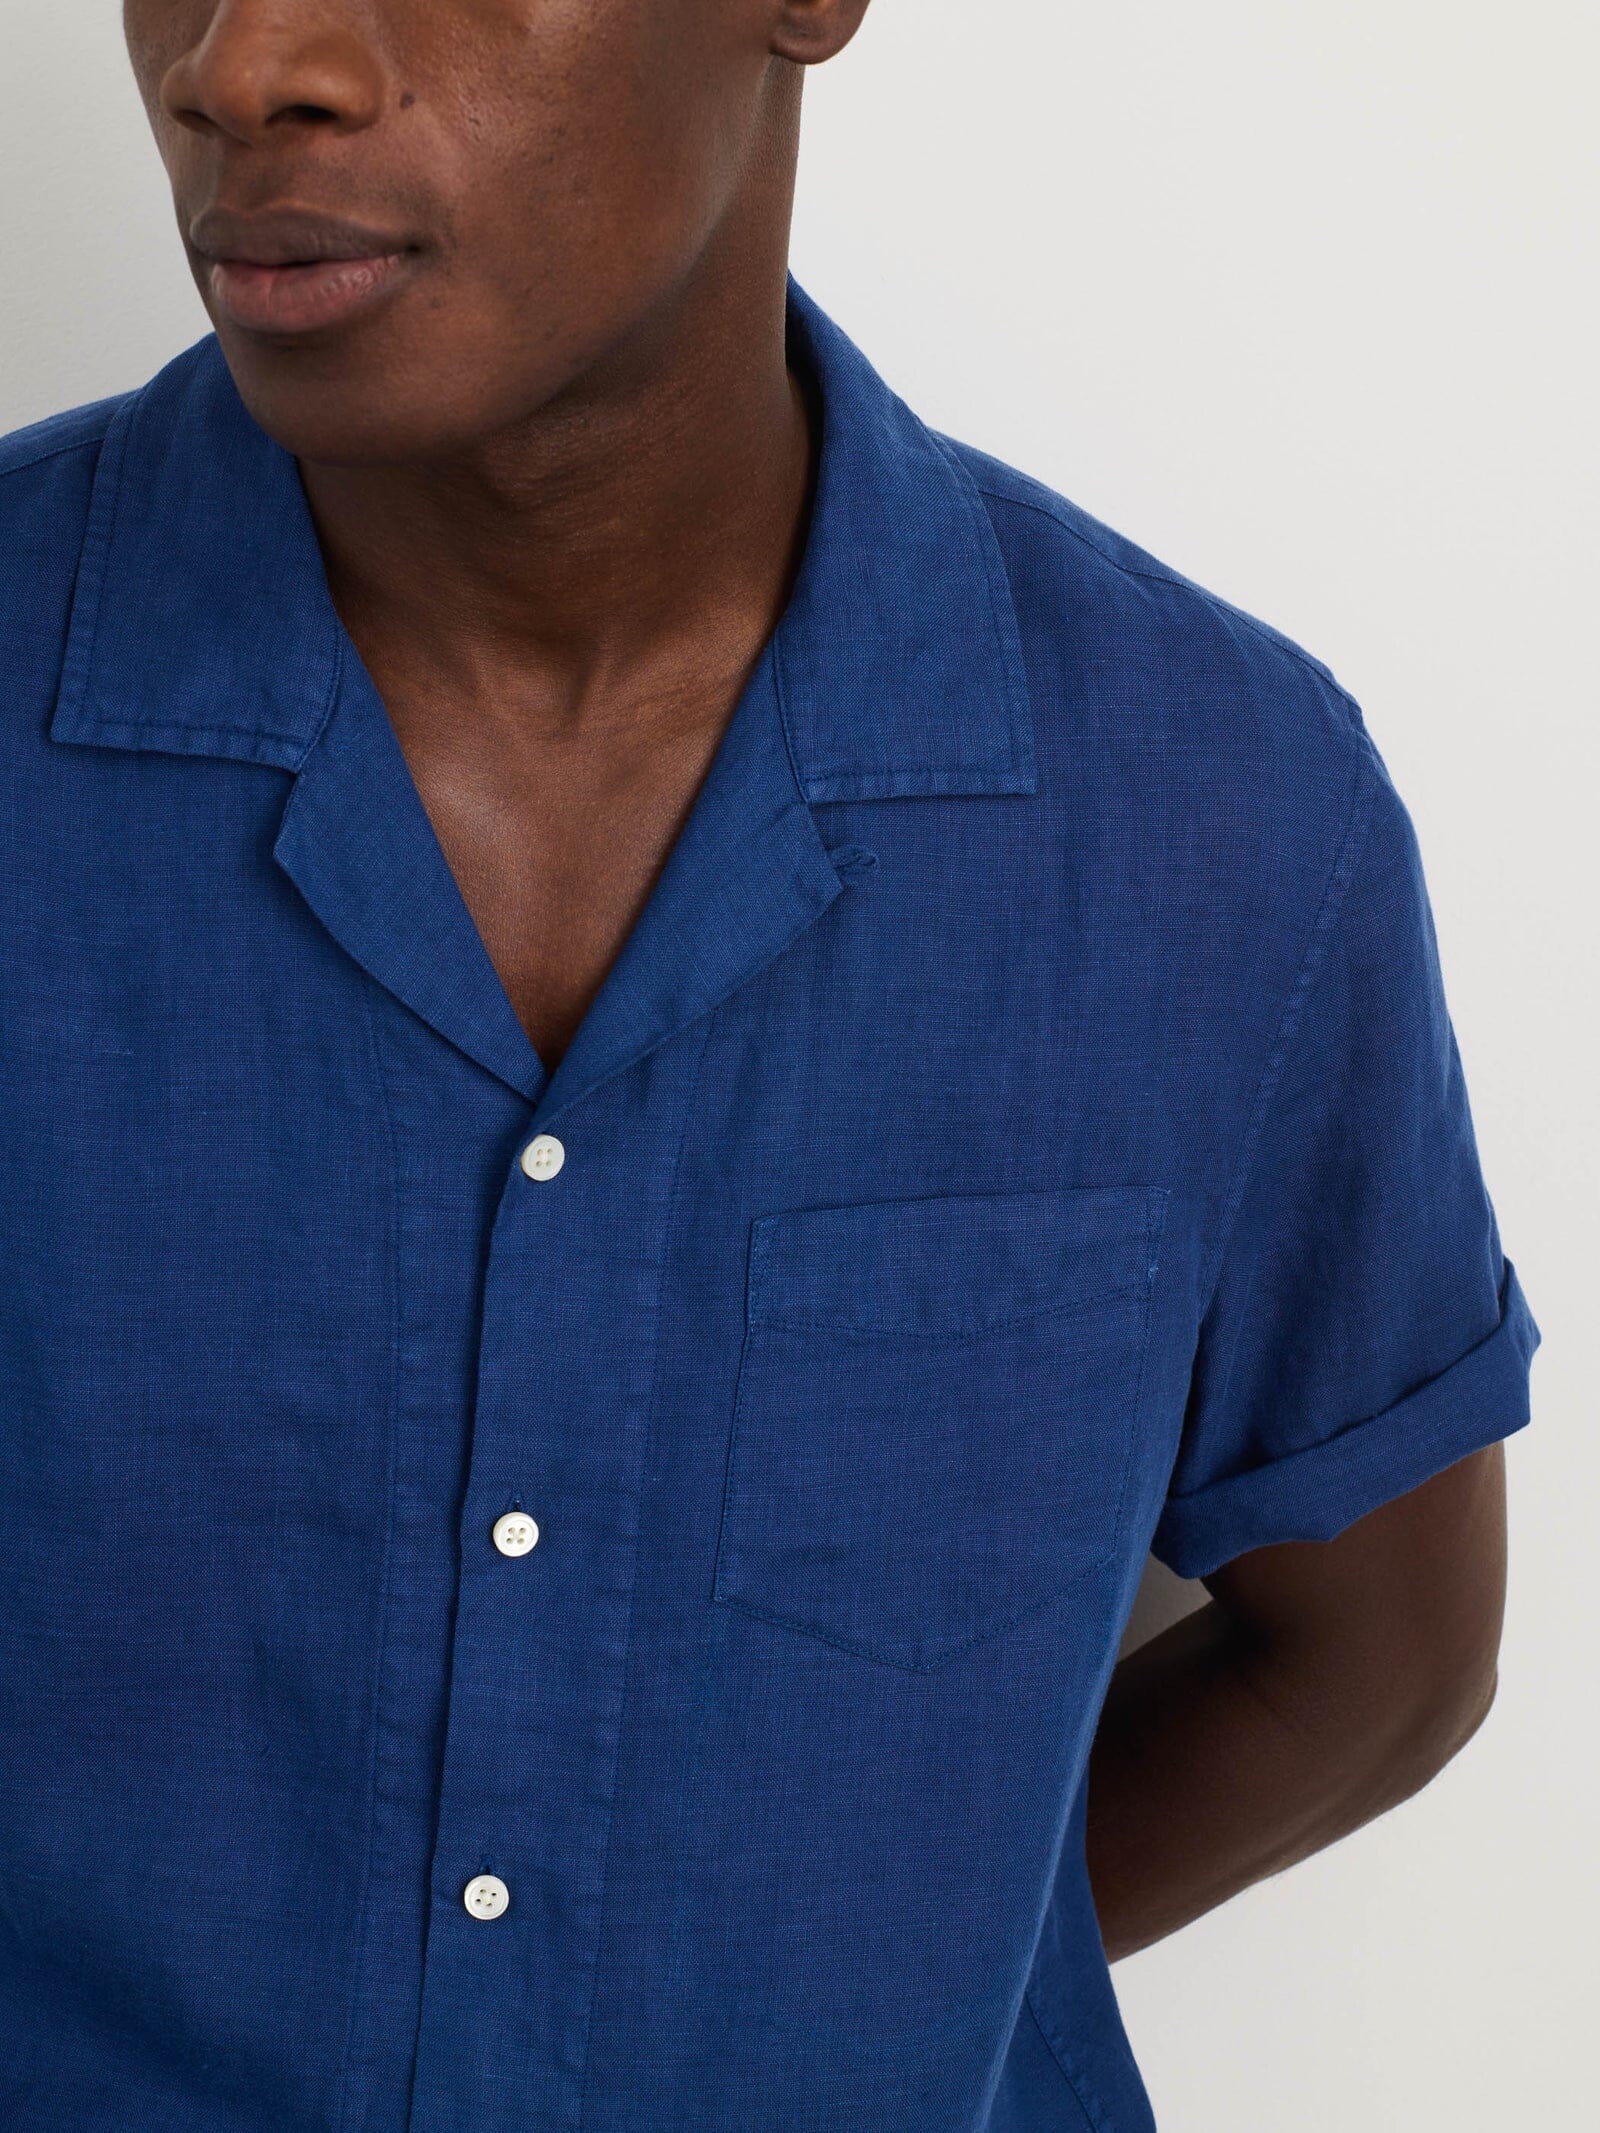 Alex Mill - Camp Shirt in Linen - French Navy - City Workshop Men's Supply Co.